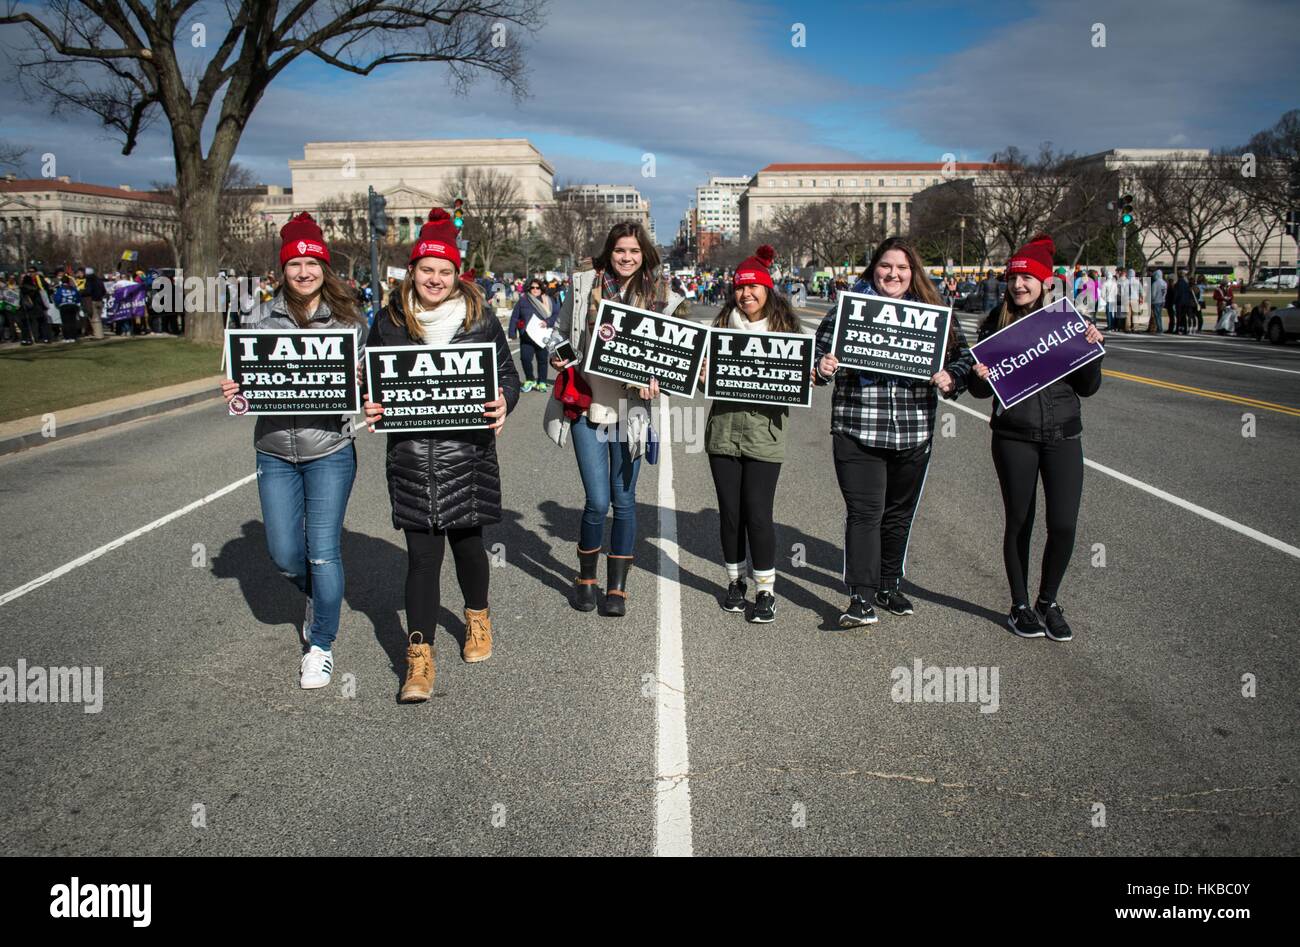 Washington, DC, USA. 27th Jan, 2017. Thousands participate to the March for life, an annual rally protesting abortion, held in Washington, DC. Pro-life activists gather at the Washington Monument to hear Vice President Mike Pence speak. Mike Pence is the first vice president to address the decades-old annual rally that abortion-rights opponents Credit: Dimitrios Manis/ZUMA Wire/Alamy Live News Stock Photo